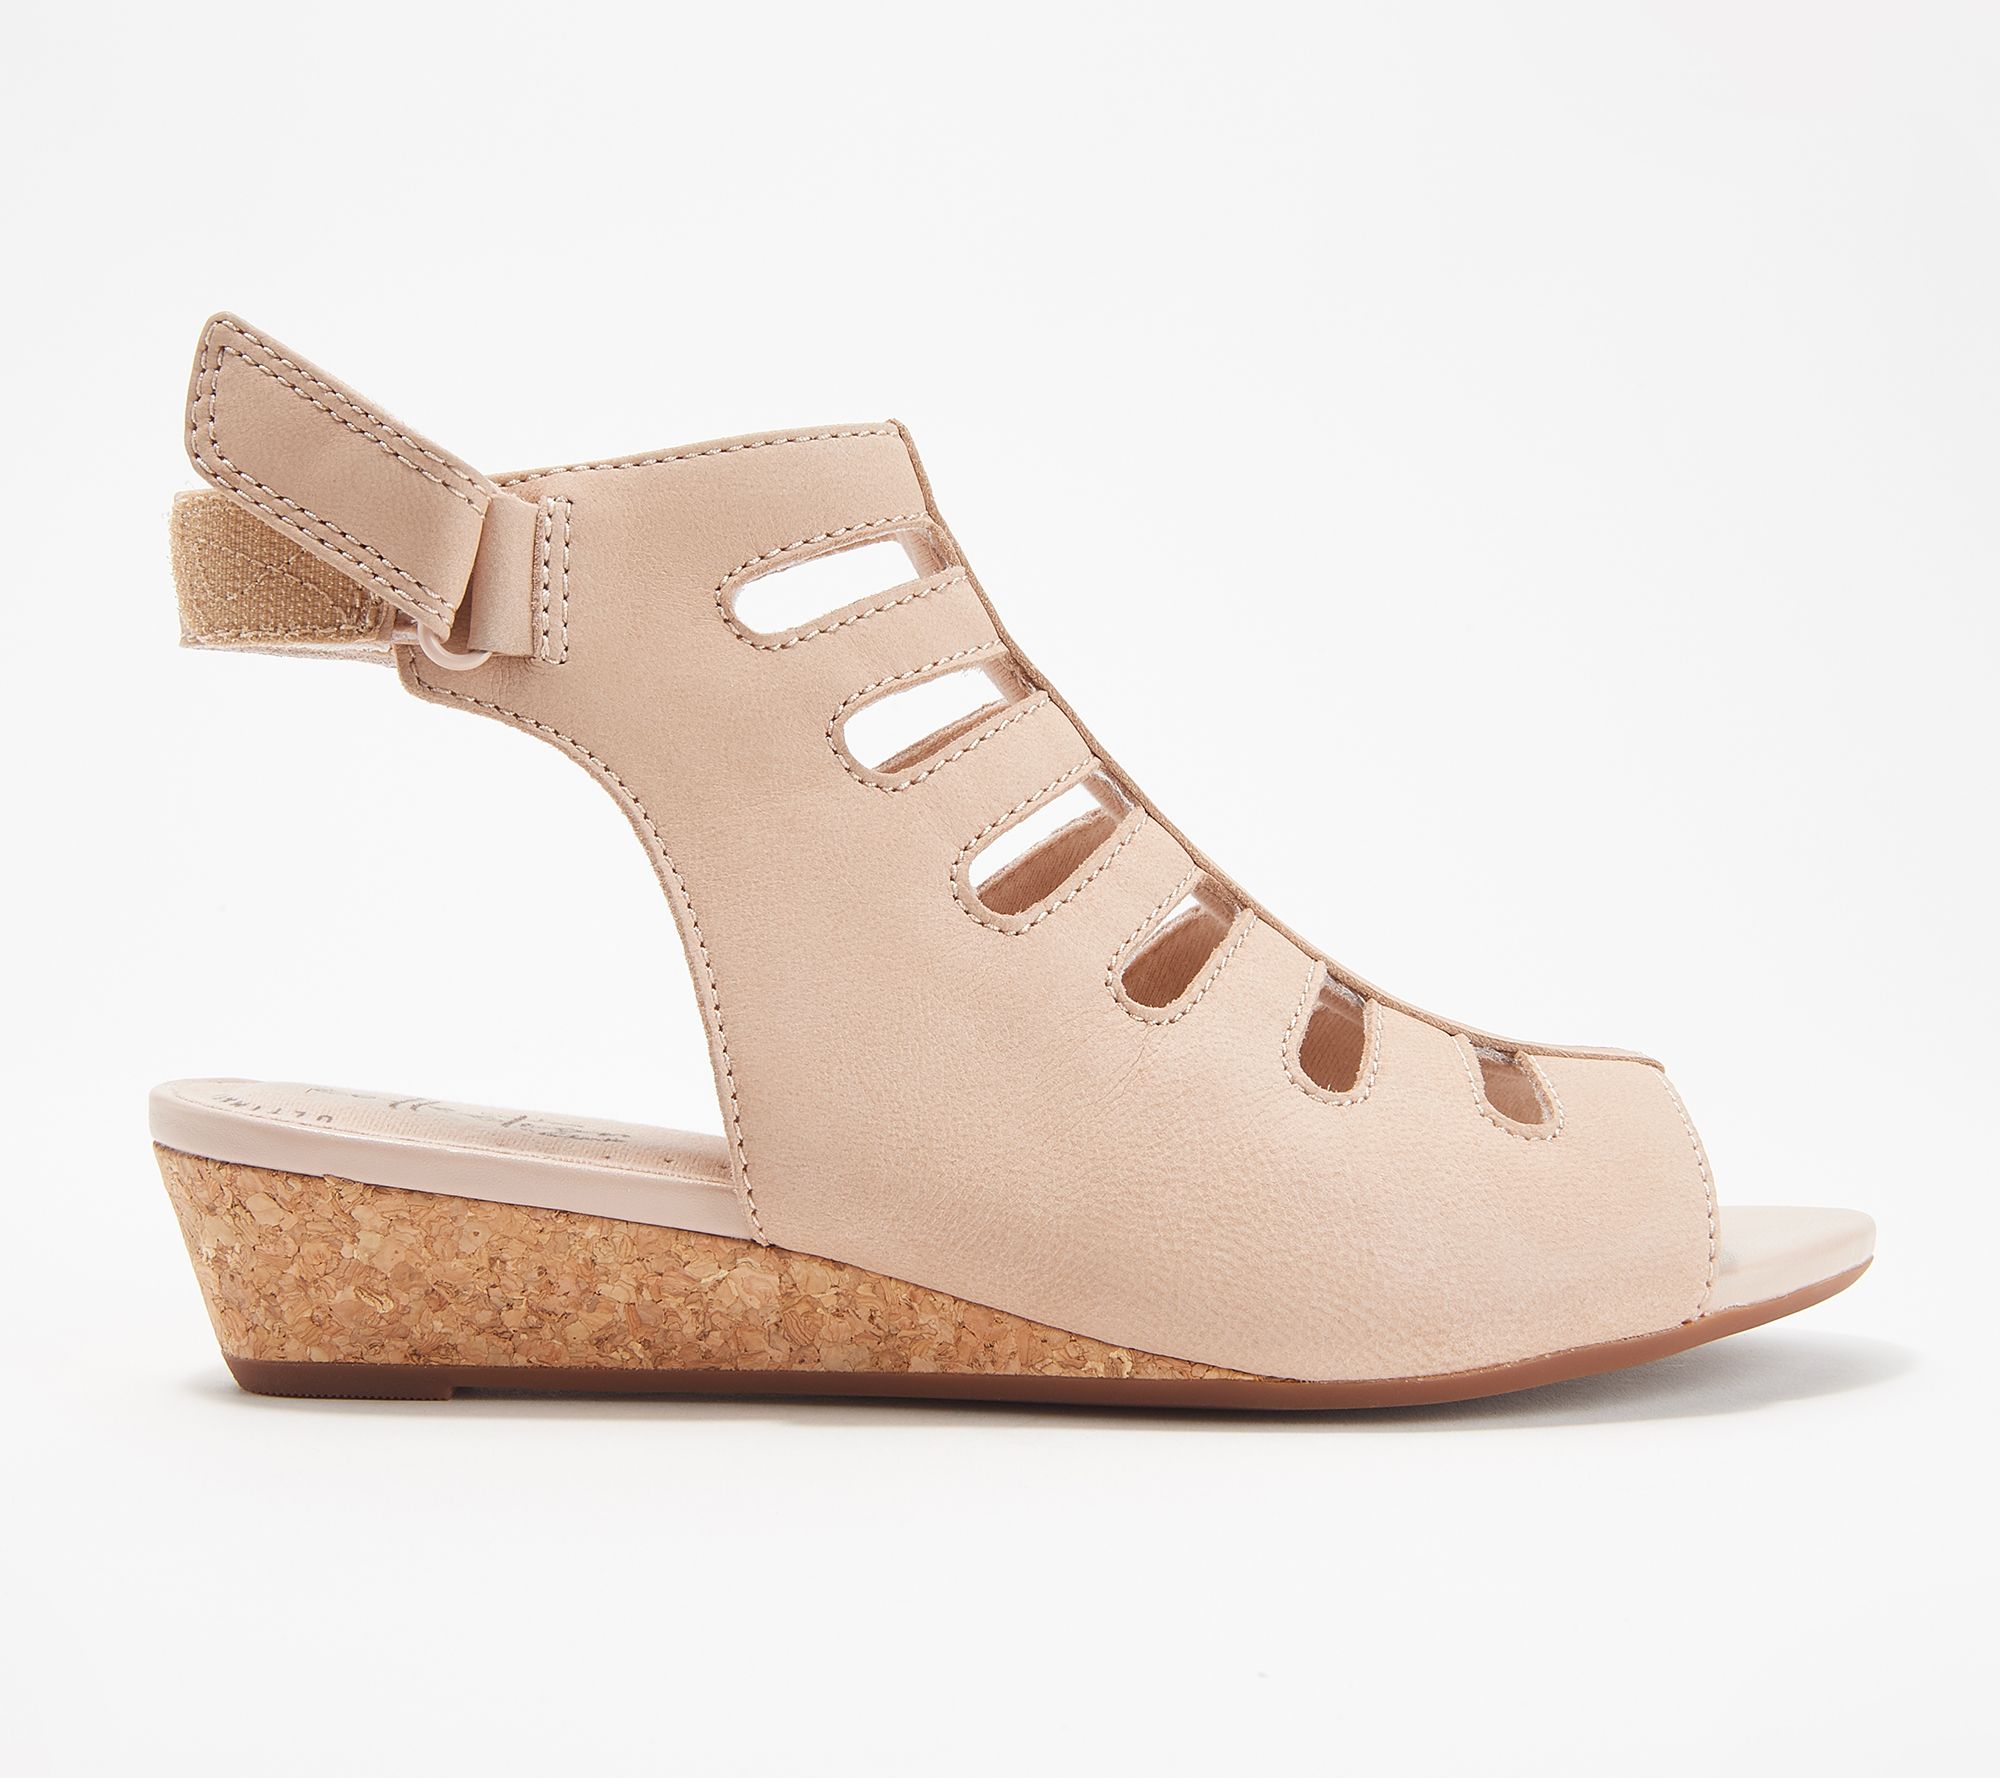 Clarks Collection Leather Cutout Wedge Sandals - Abigail Sing - QVC.com